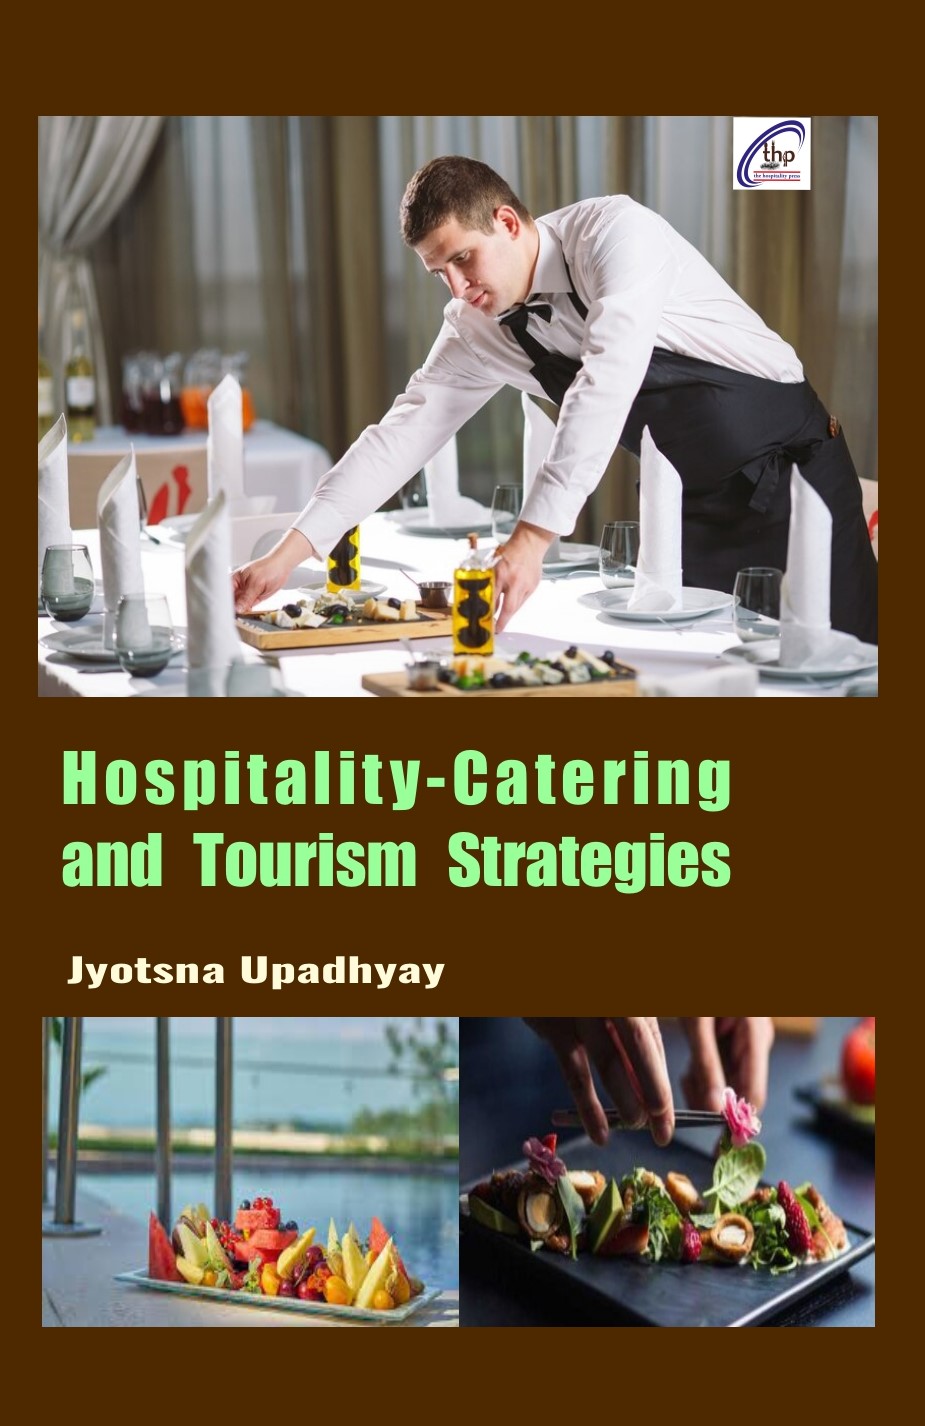 Hospitality-Catering and Tourism Strategies